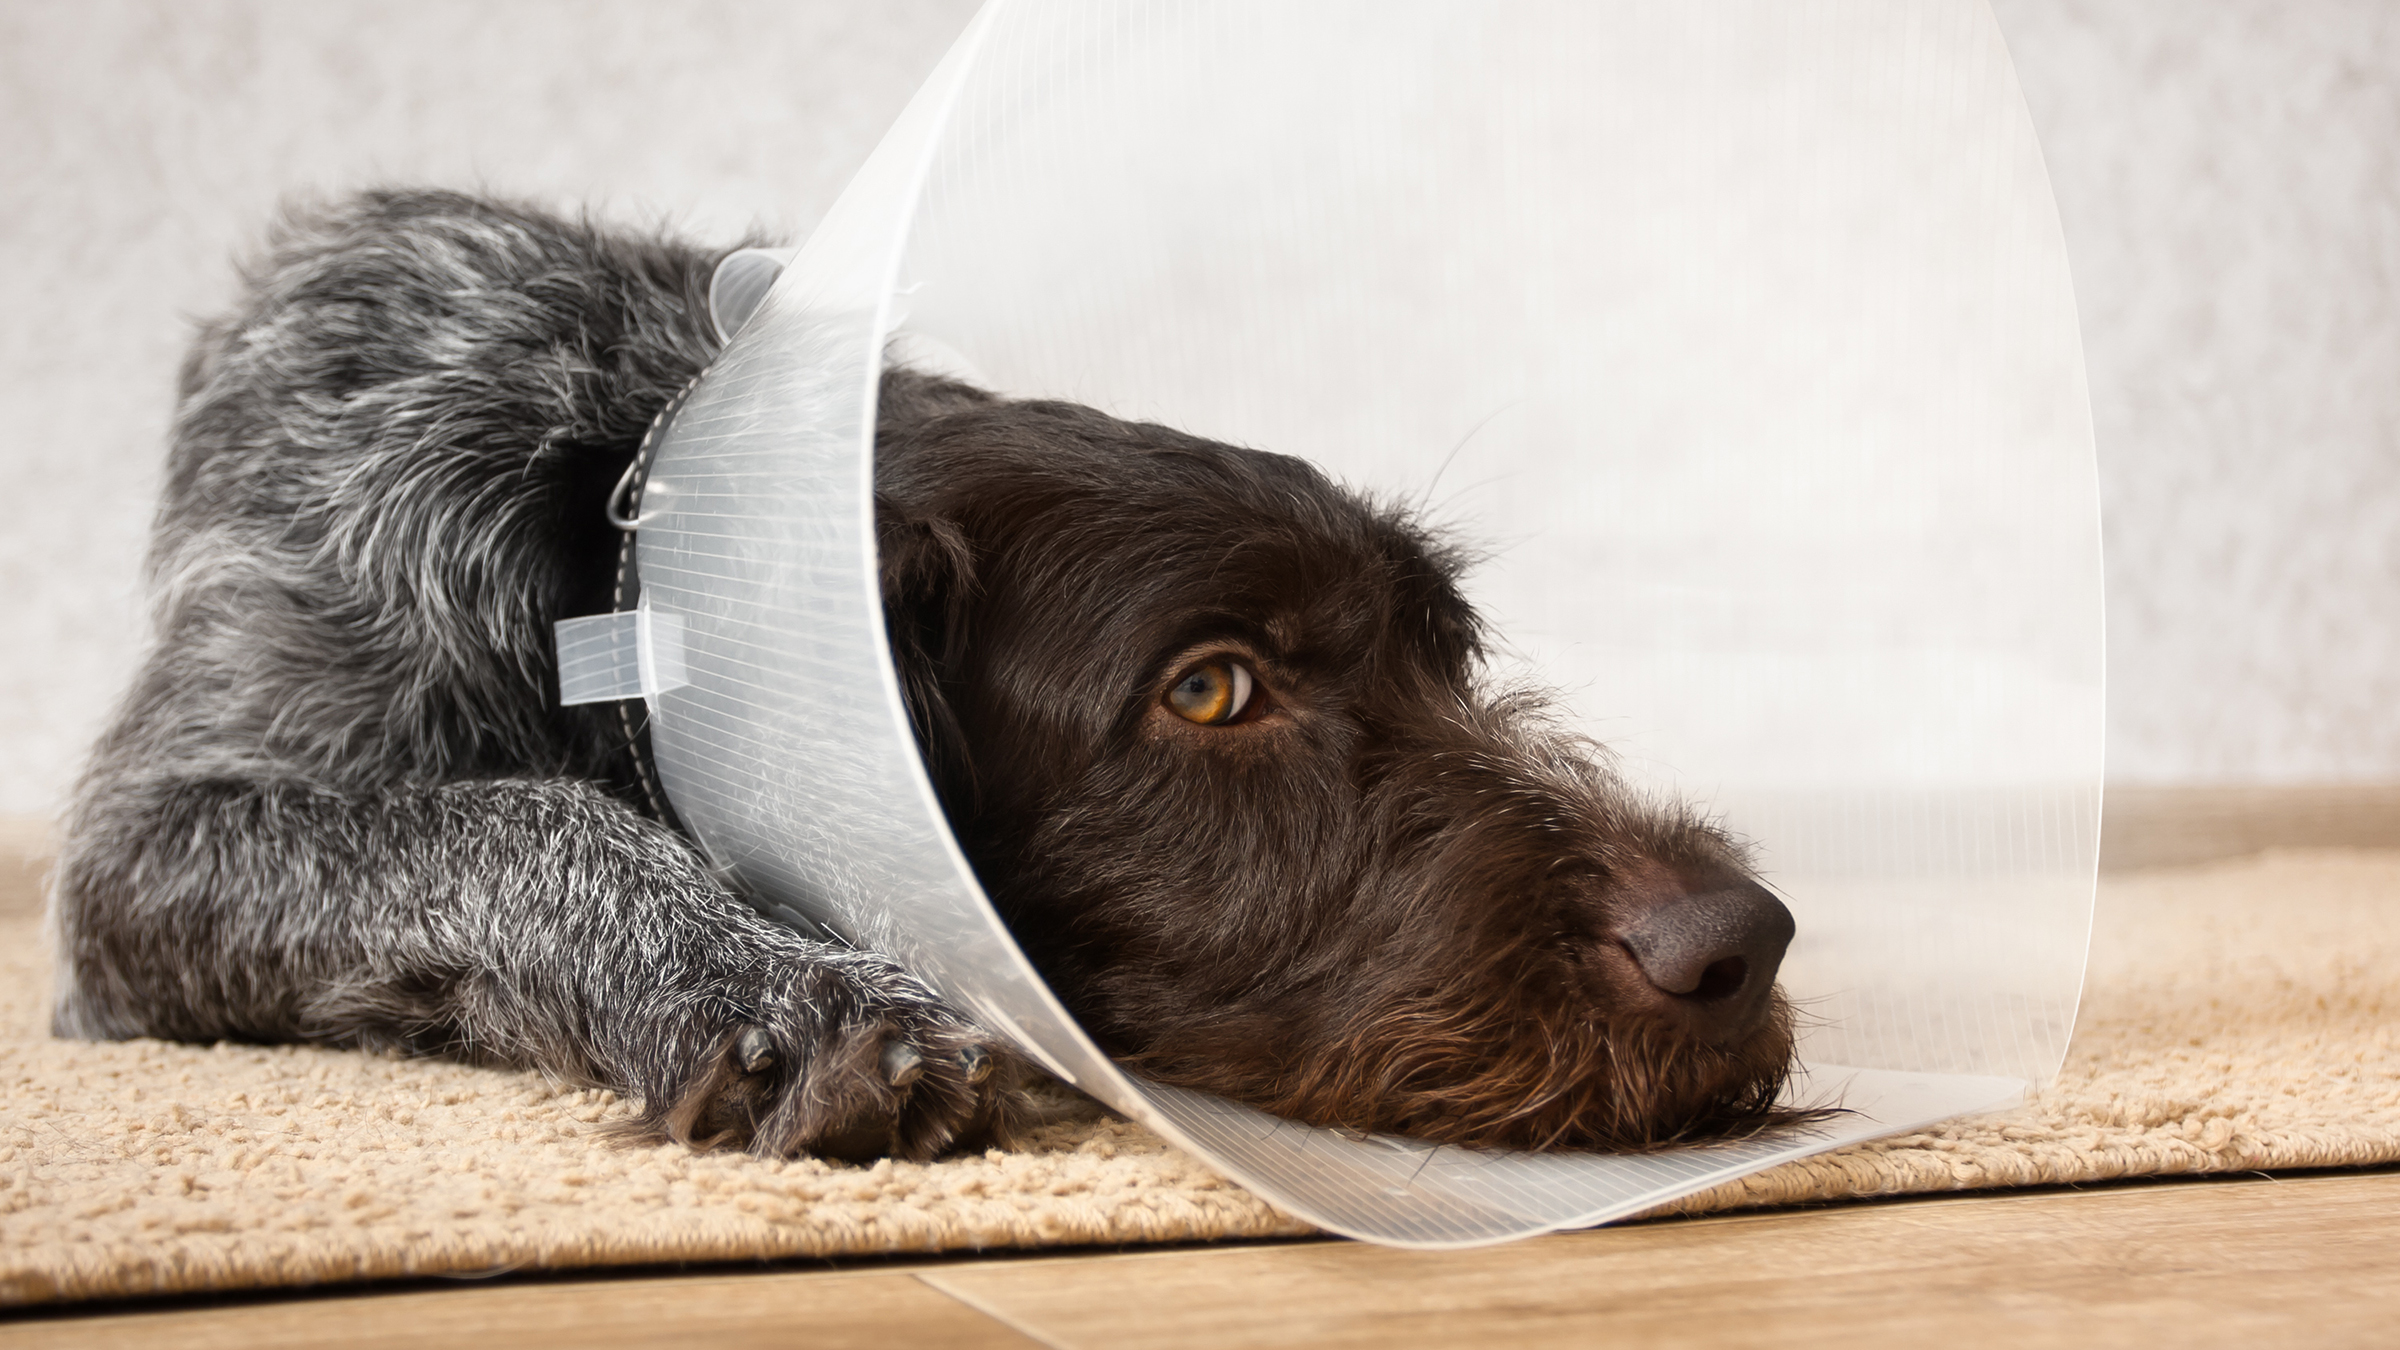 Dog Cone Alternatives For Post Op - Whole Dog Journal